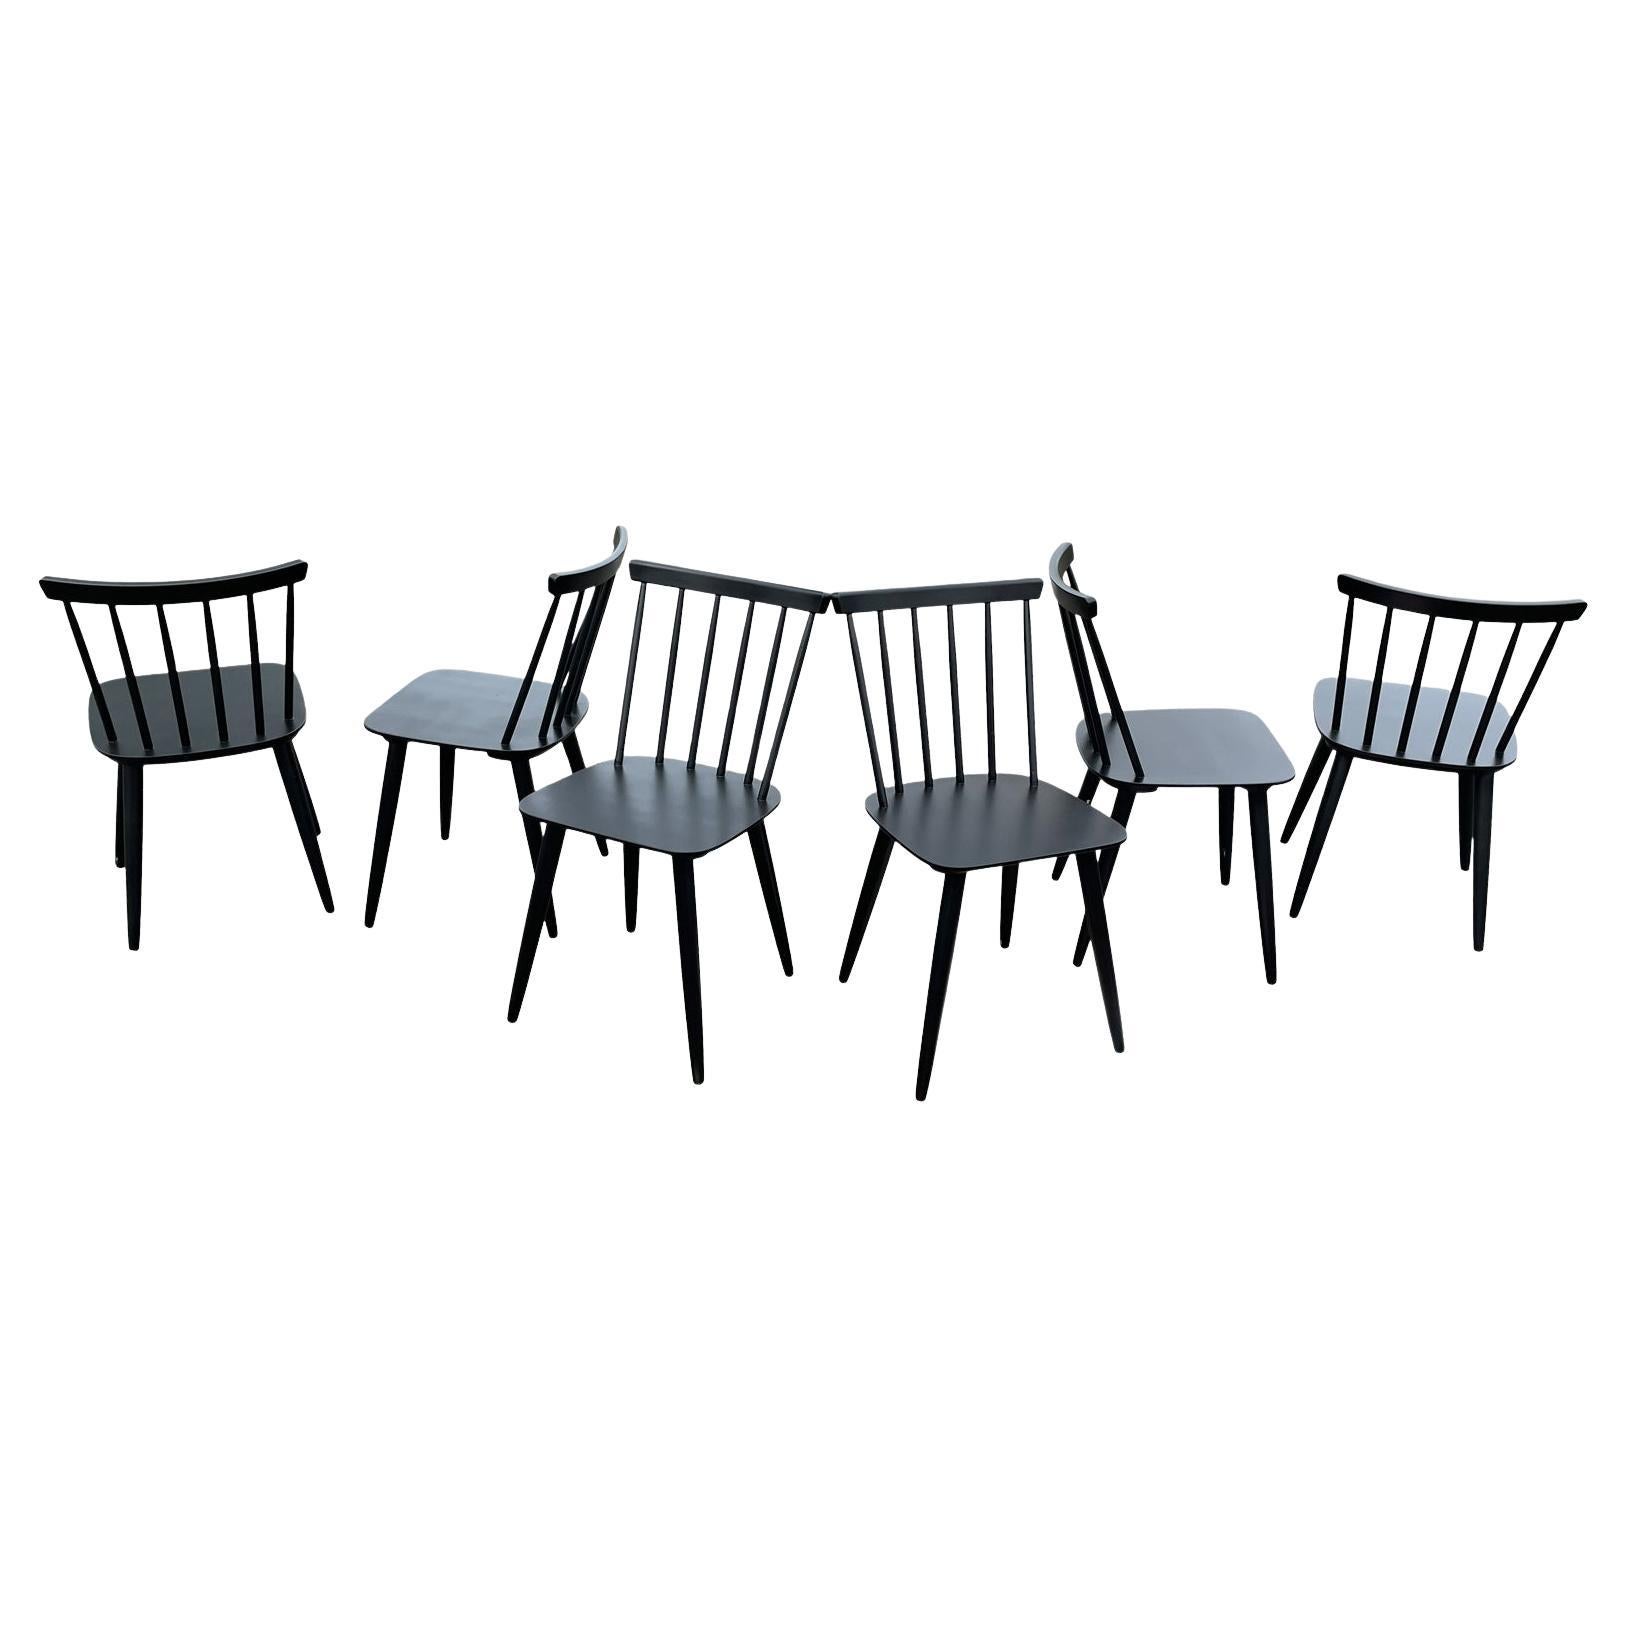 Wonderful set of 6 black lacquered wooden chairs by Varjonen made in Finland 